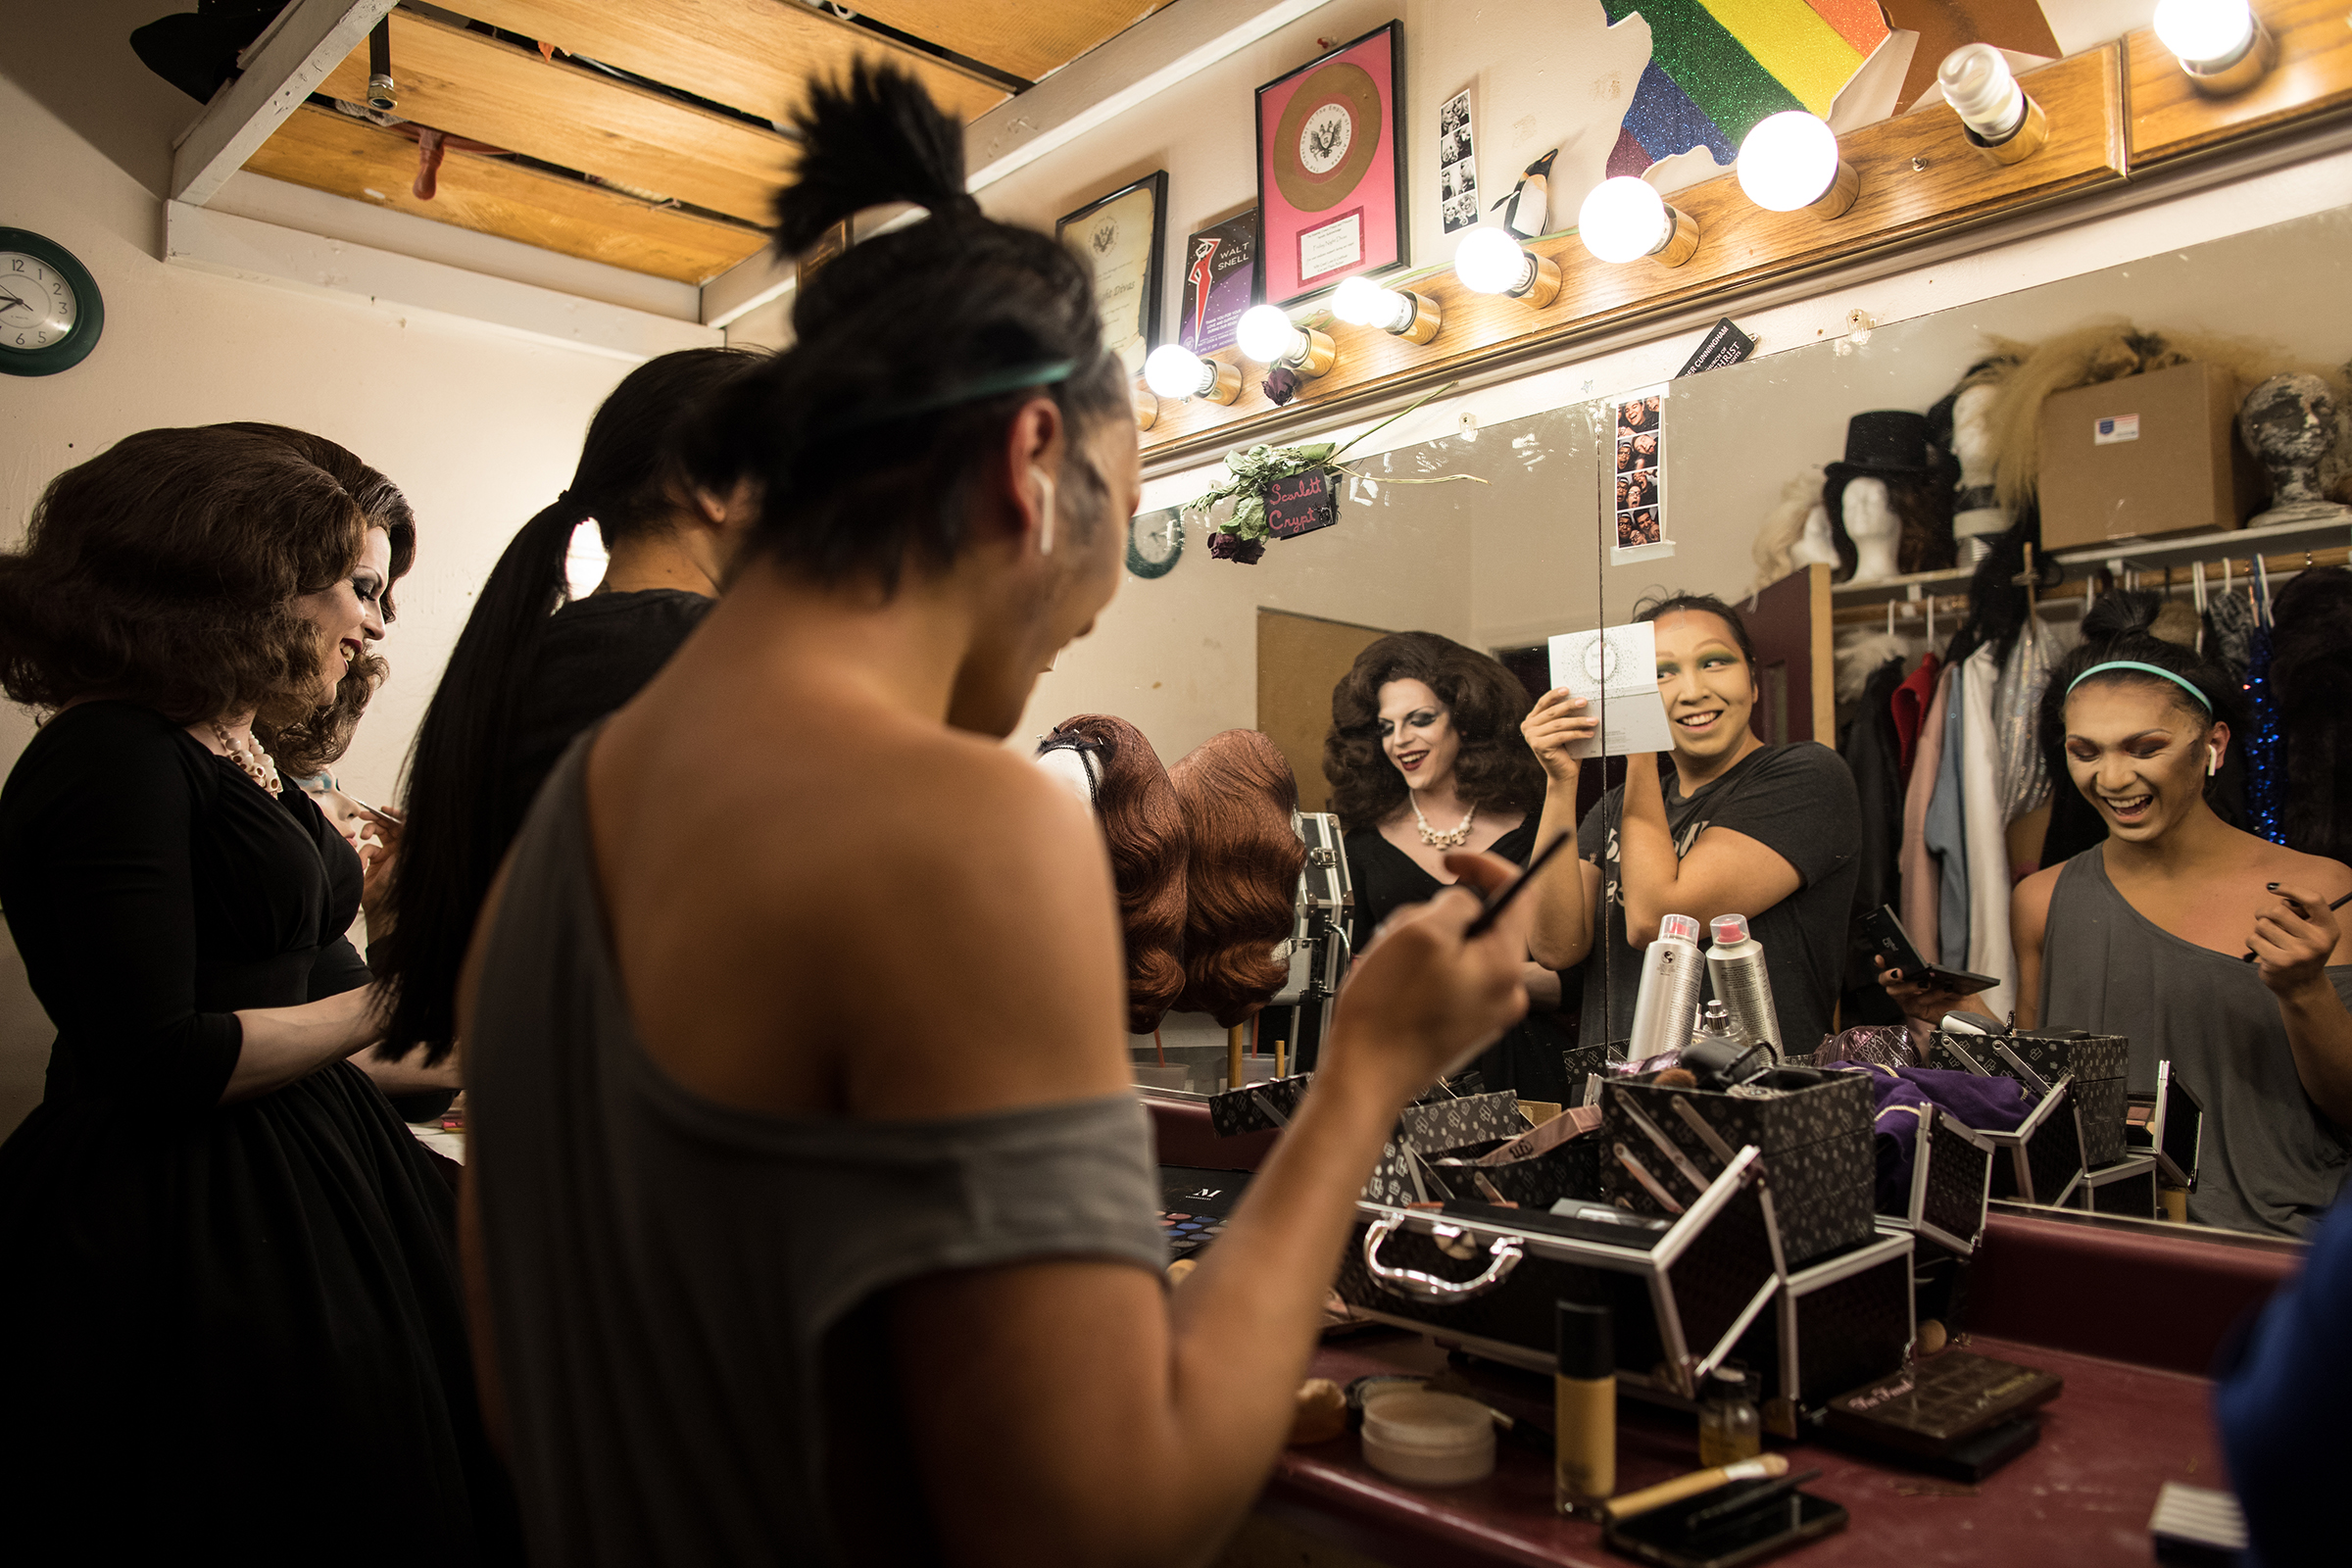 Drag Queens Scarlett Crypt, Lady Fairchild, and Venus Vixen get ready backstage at Mad Myrna's. (Ash Adams for TIME)